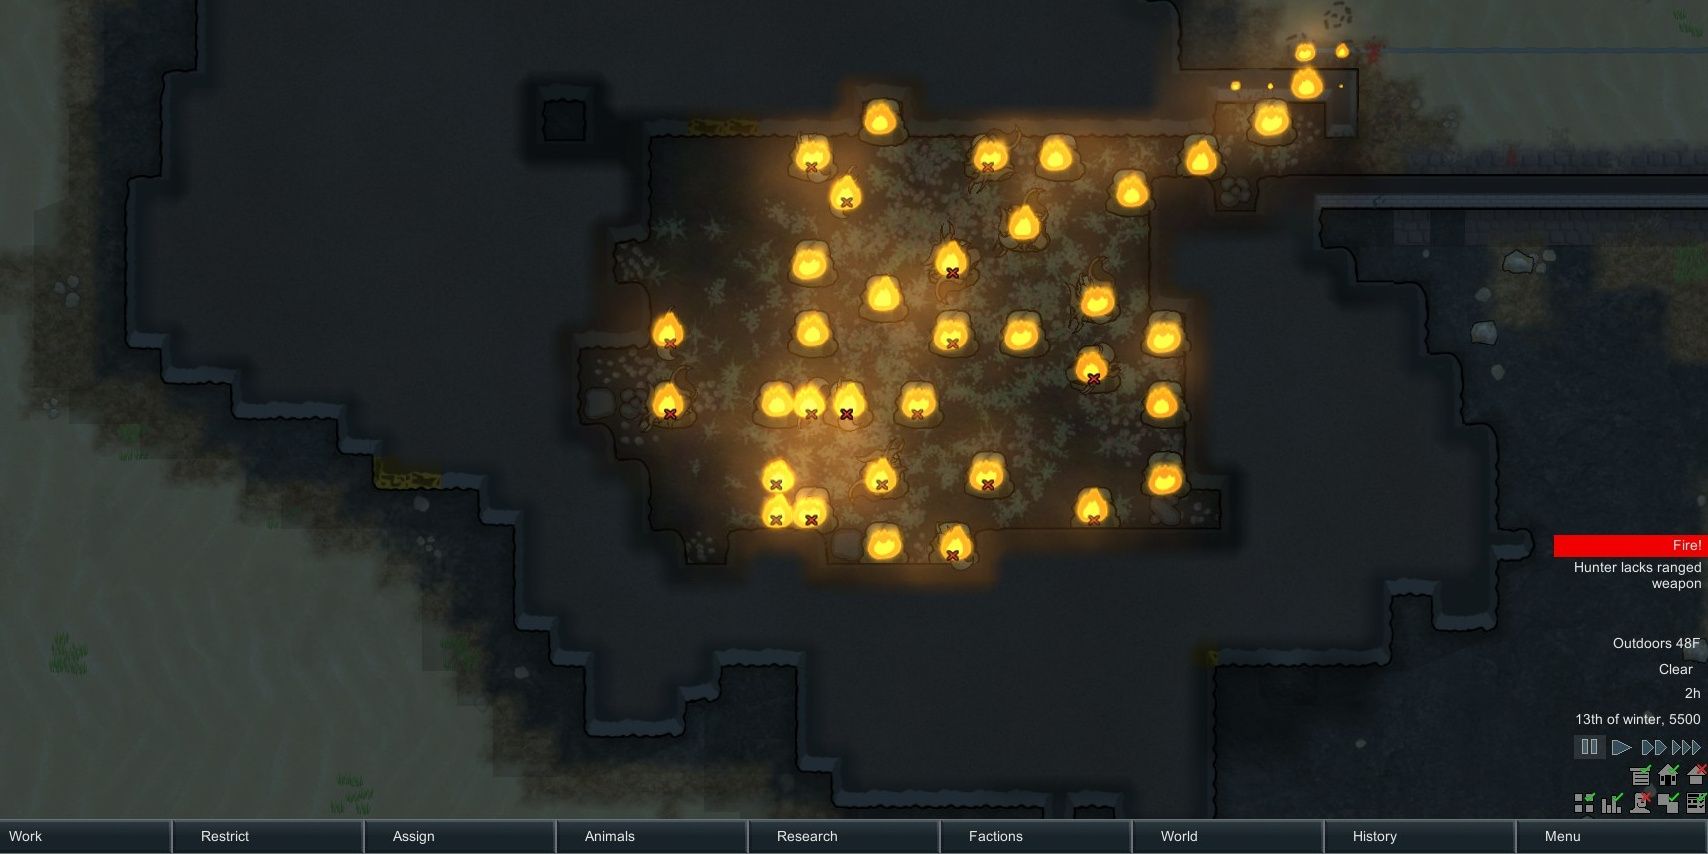 Getting rid of an infestation using a Molotov cocktail in RimWorld